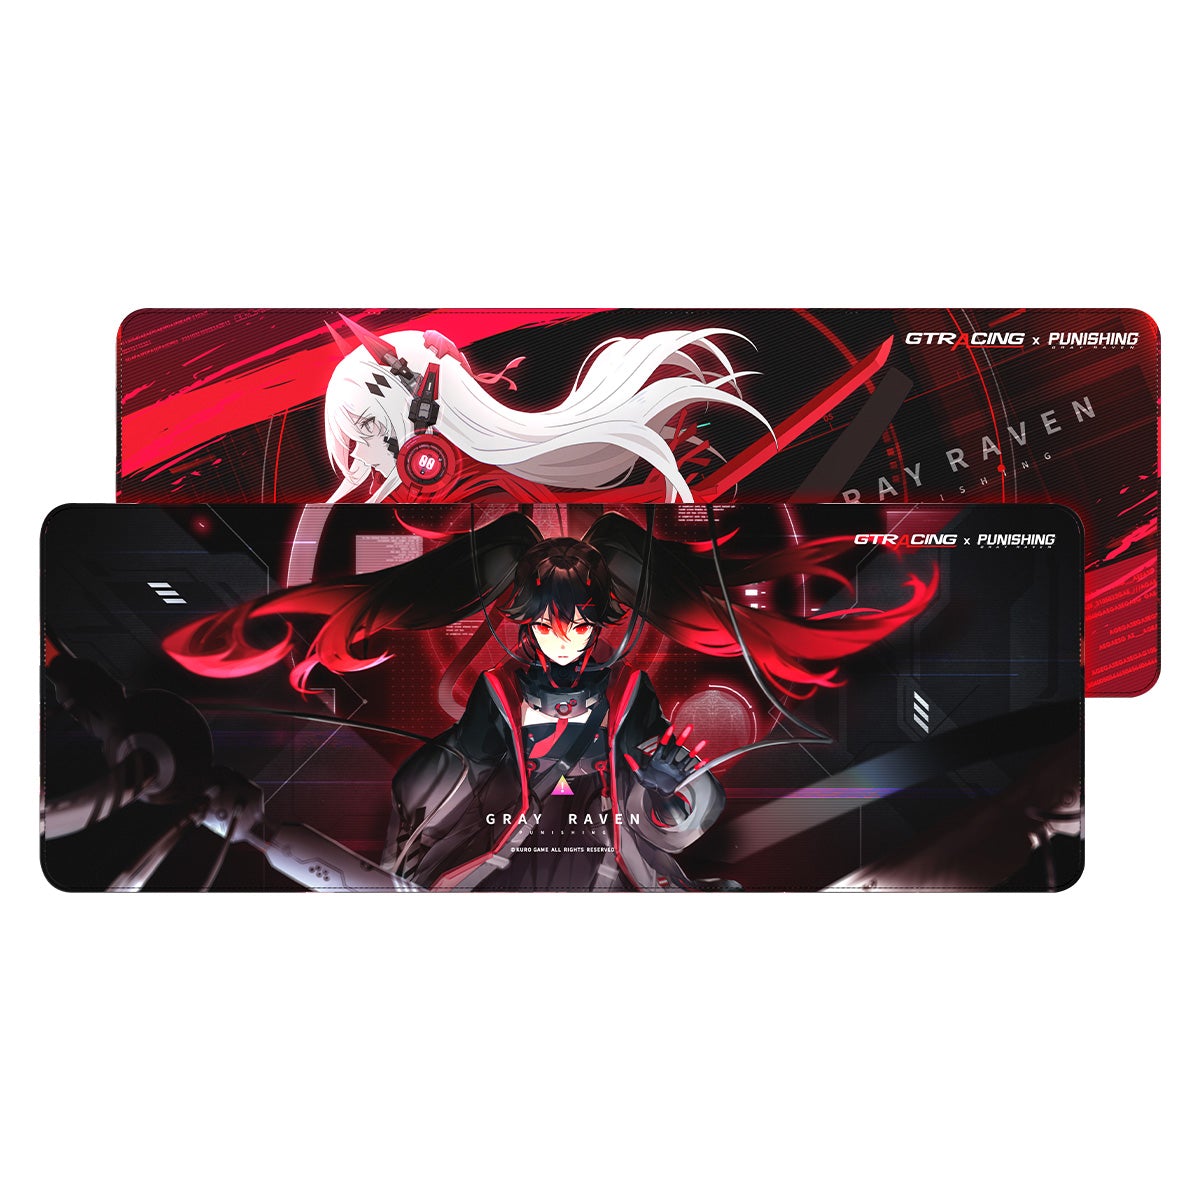 GTRACING X PGR Edition Mouse Pad - GTRACING